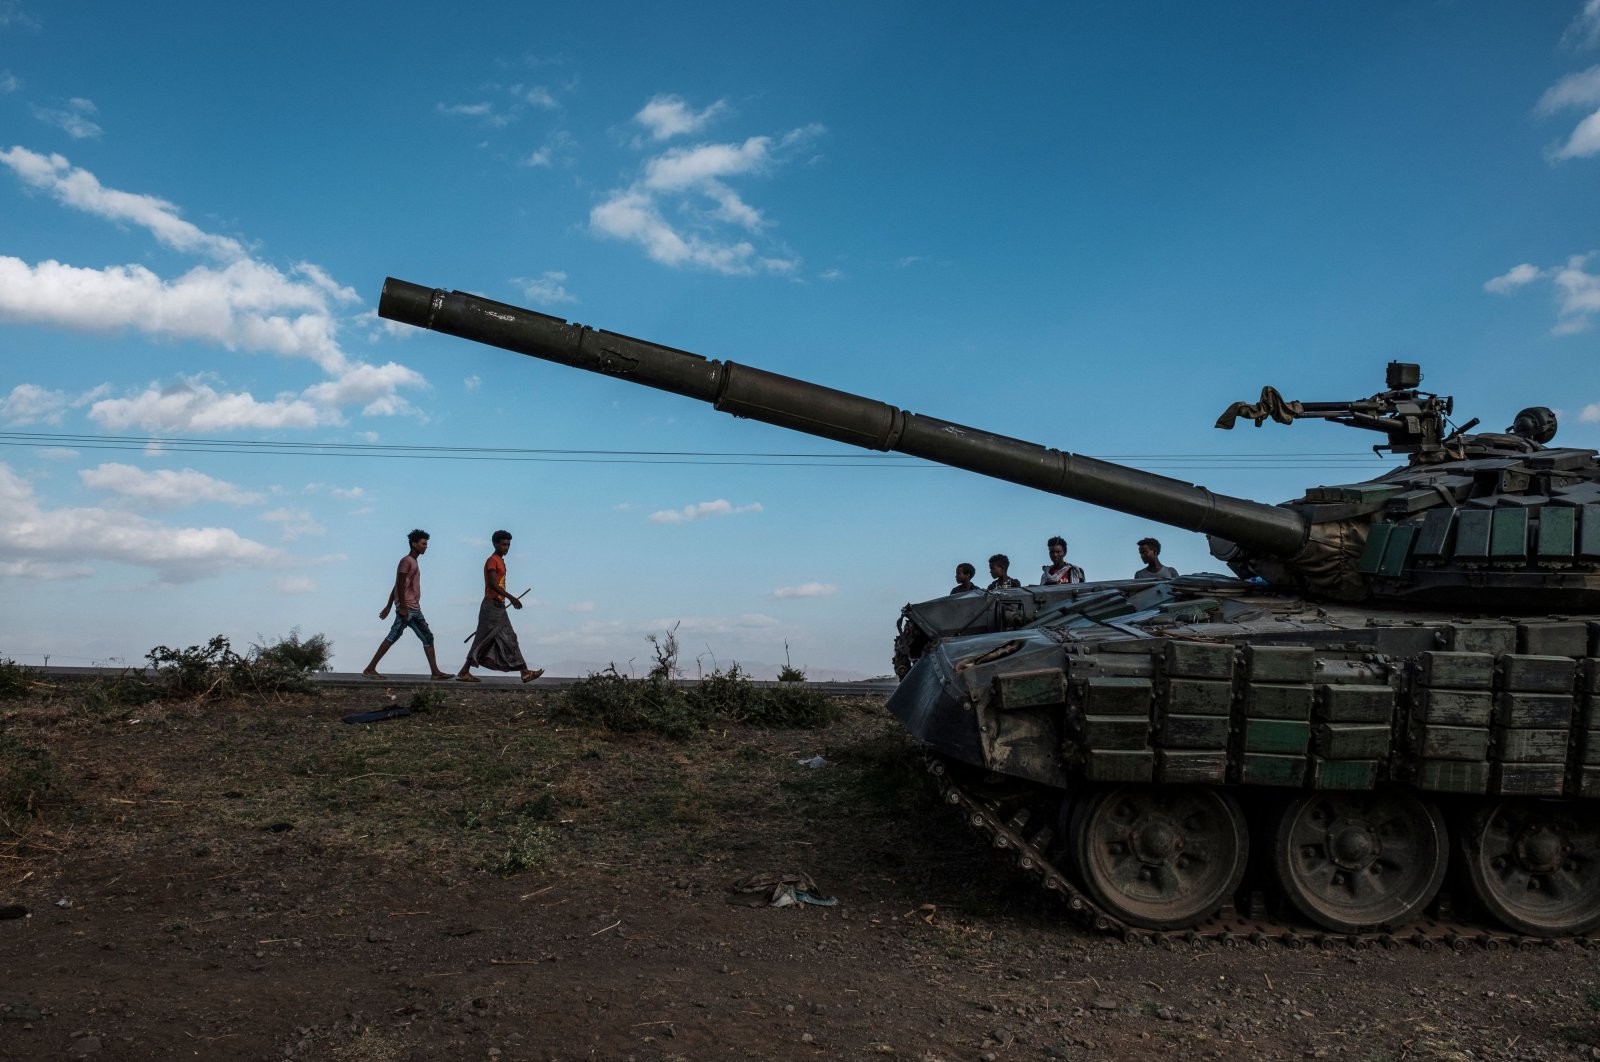 Youngsters walk next to an abandoned destroyed tank south of the town of Mehoni, Ethiopia, Dec. 11, 2020. (AFP Photo)